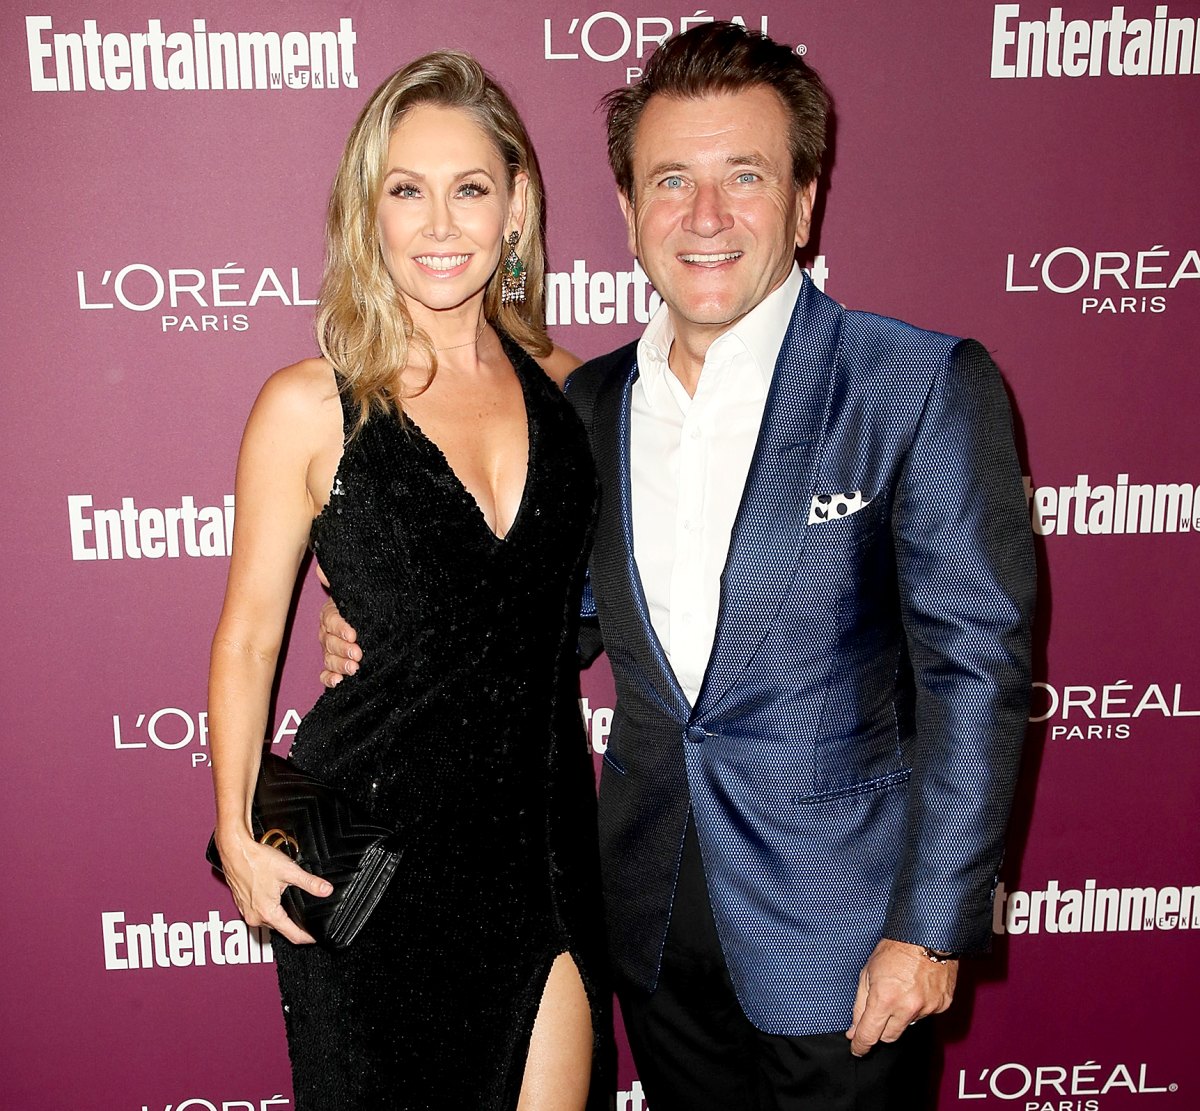 Pregnant Kym Johnson Shows Off Bare Baby Bump: '18 Weeks With Twins!'